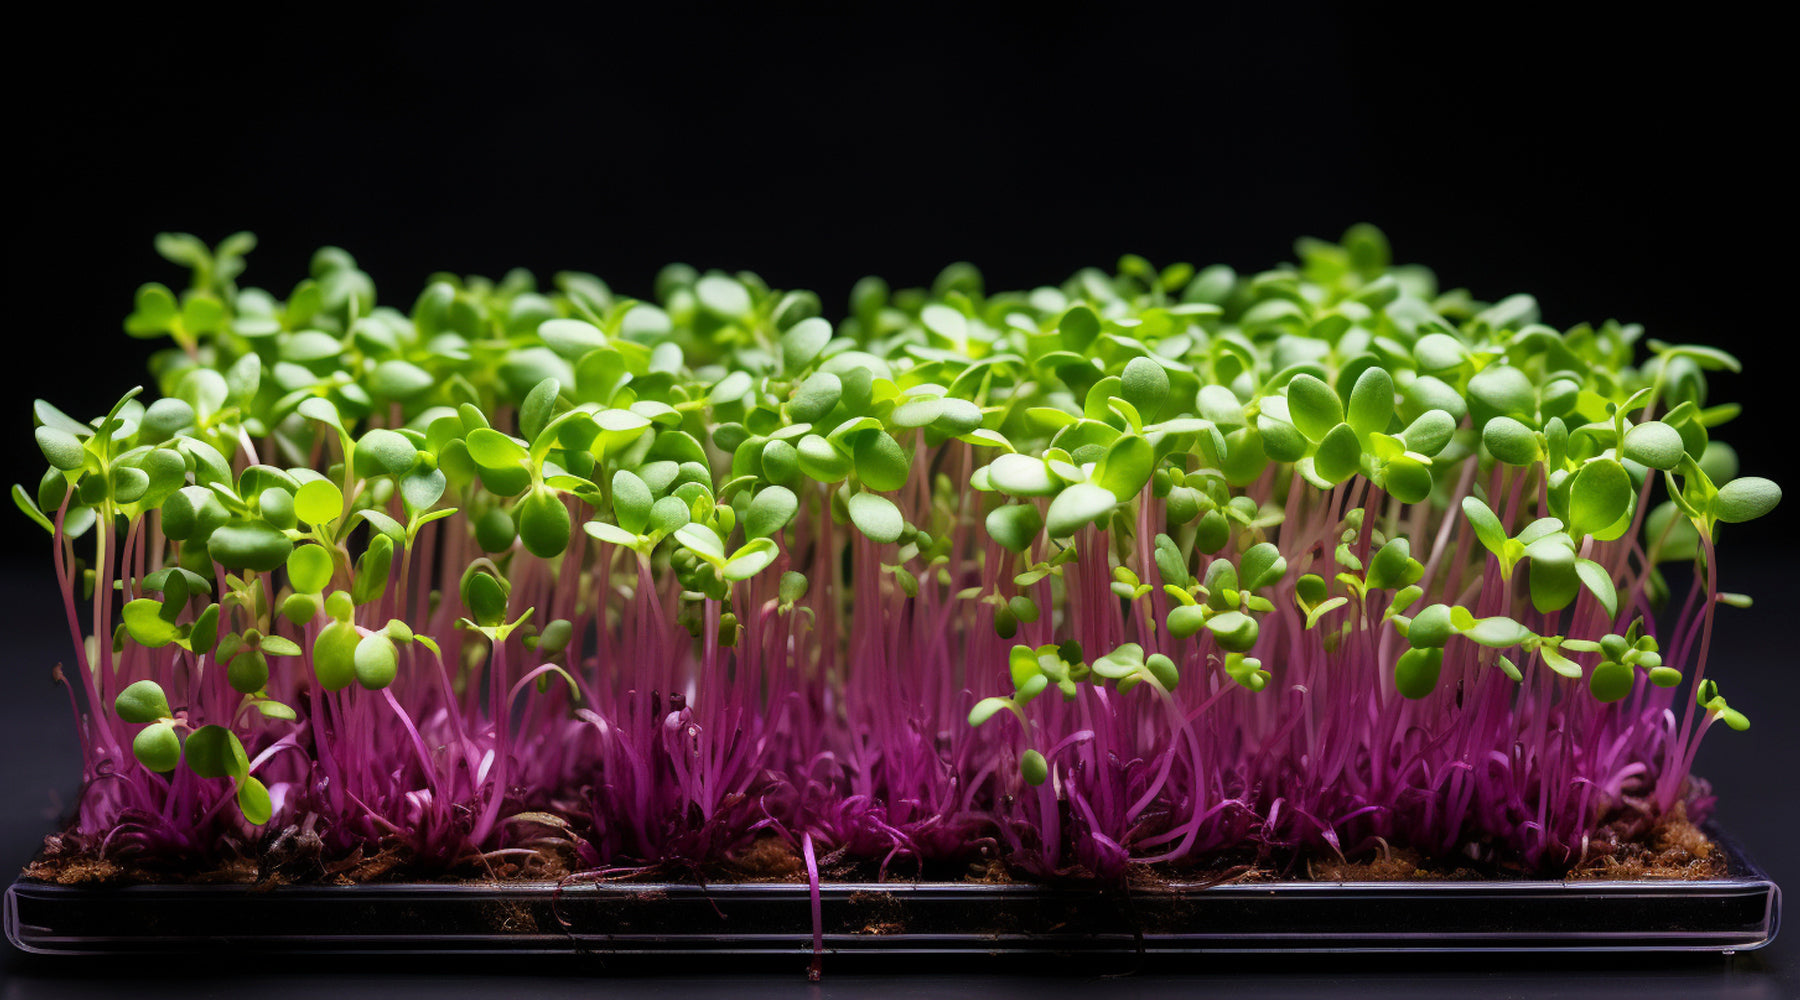 Microgreens grown hydroponically indoors for home delivery and restaurants.